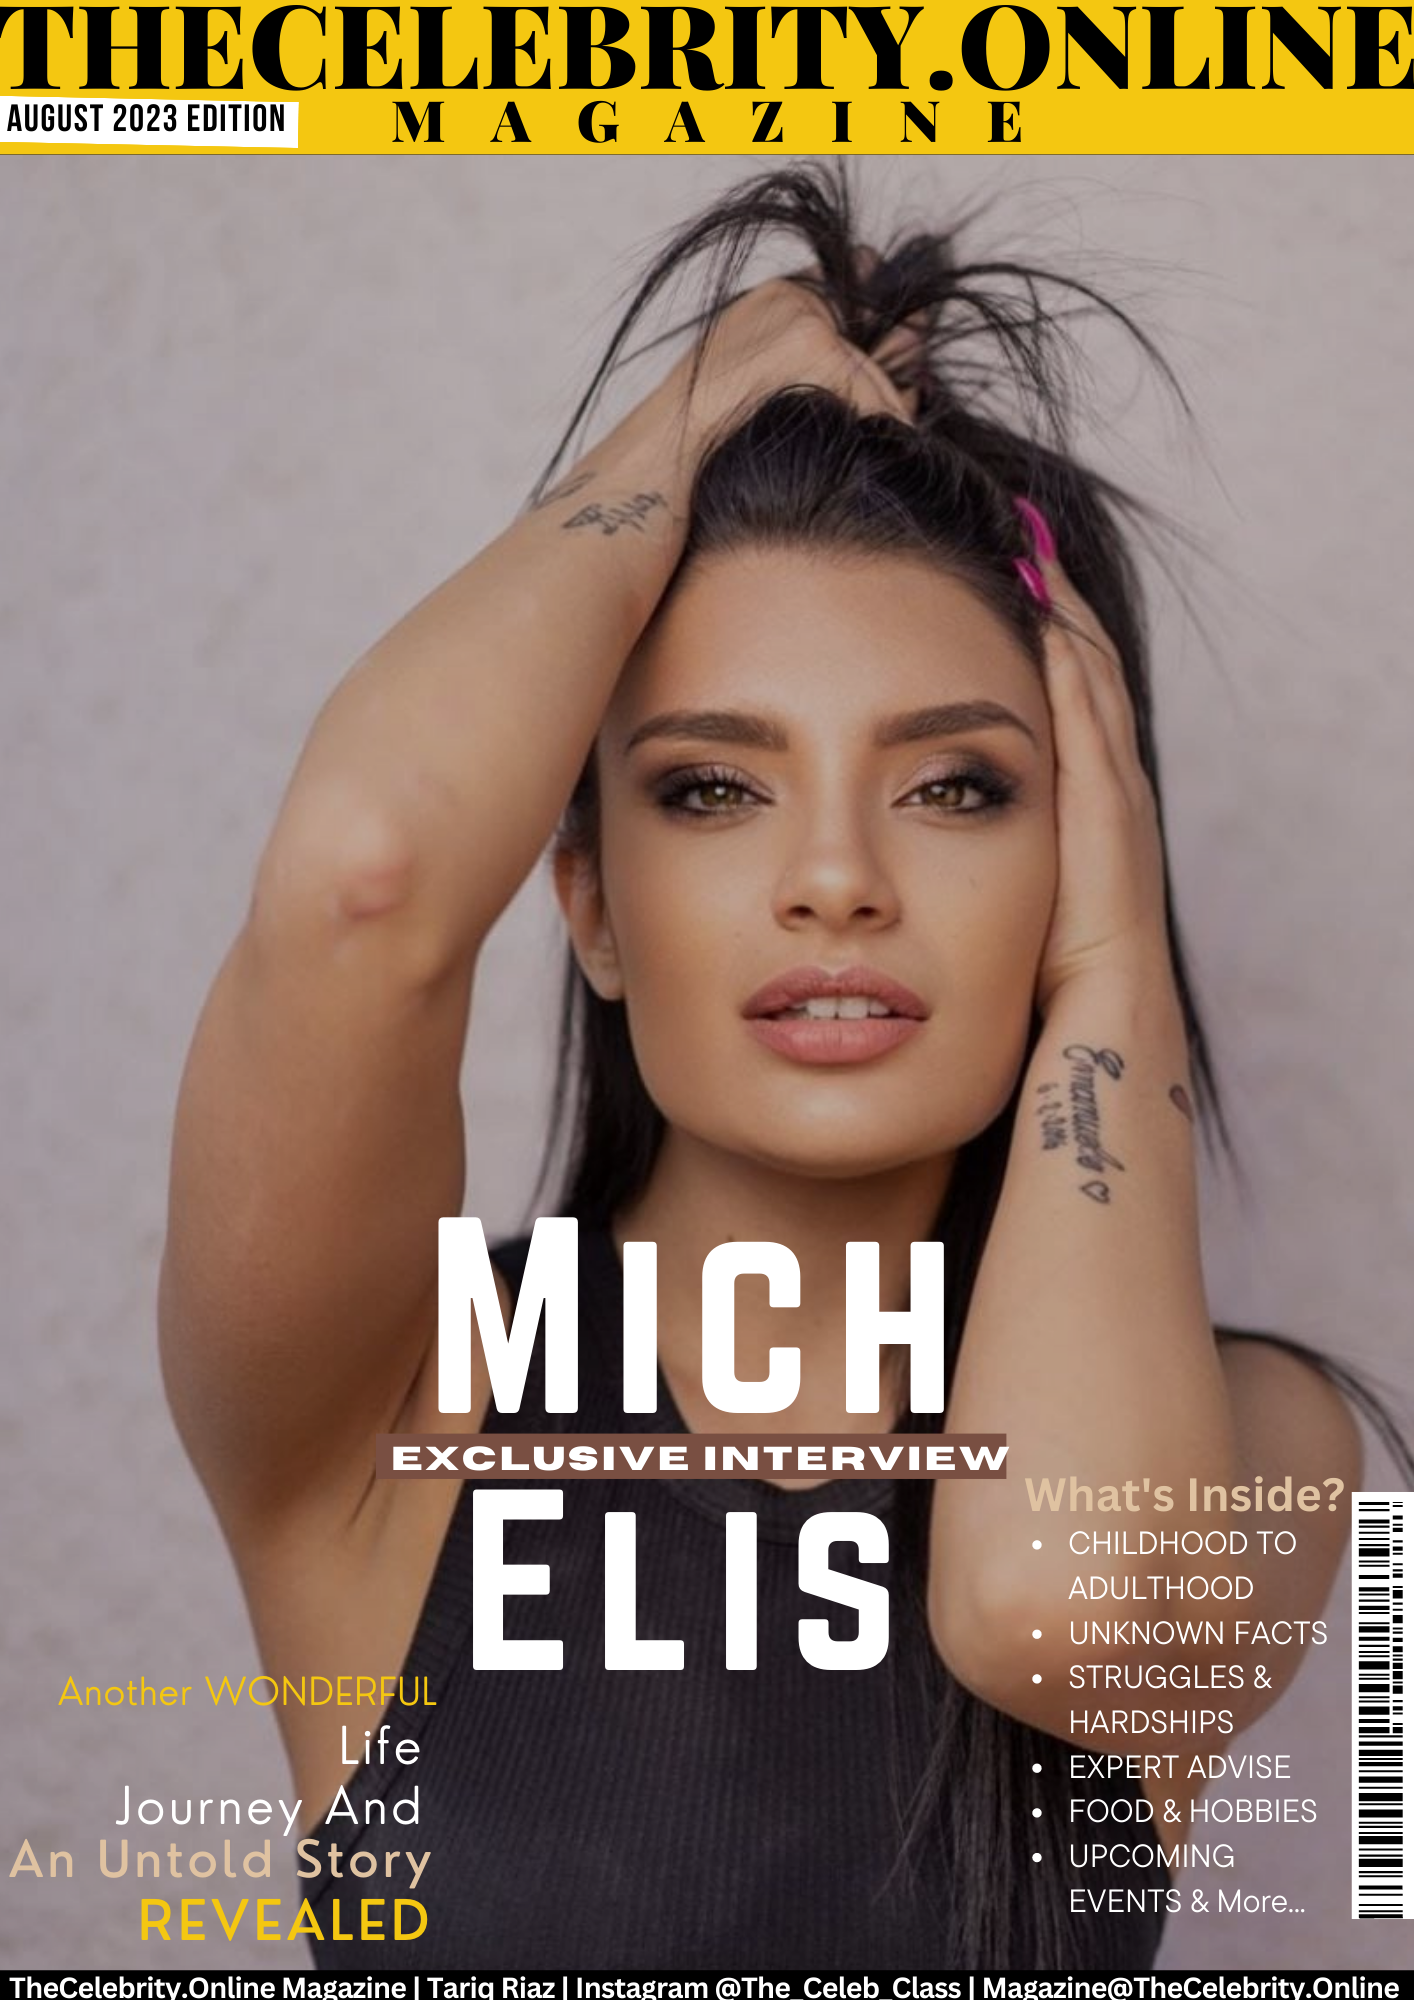 Mich Elis Exclusive Interview – ‘Behind My Photos, I Am A Sensitive Woman’